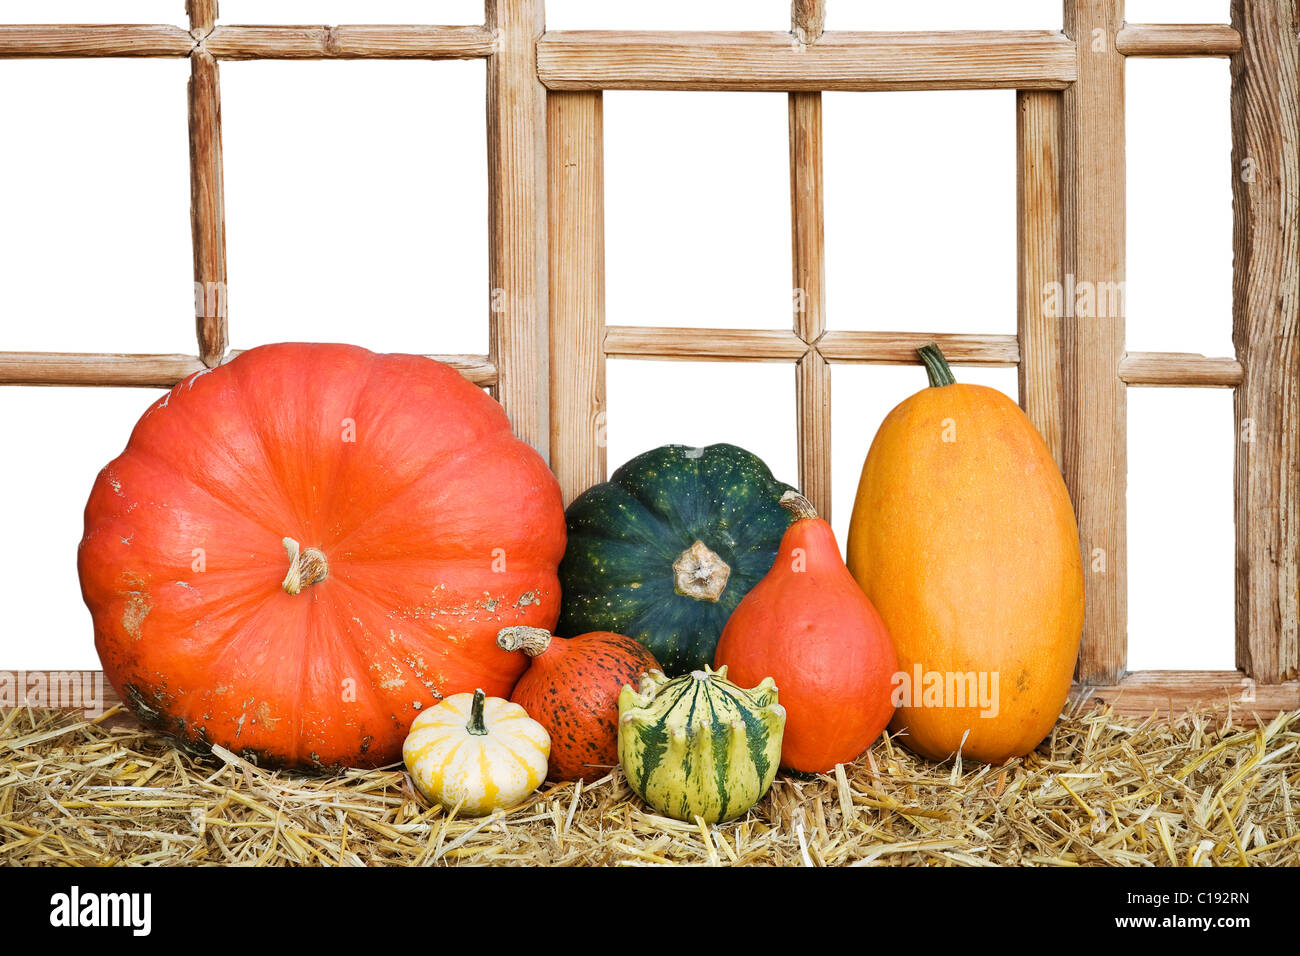 Colourful cucurbitas in front of an old wooden window Stock Photo